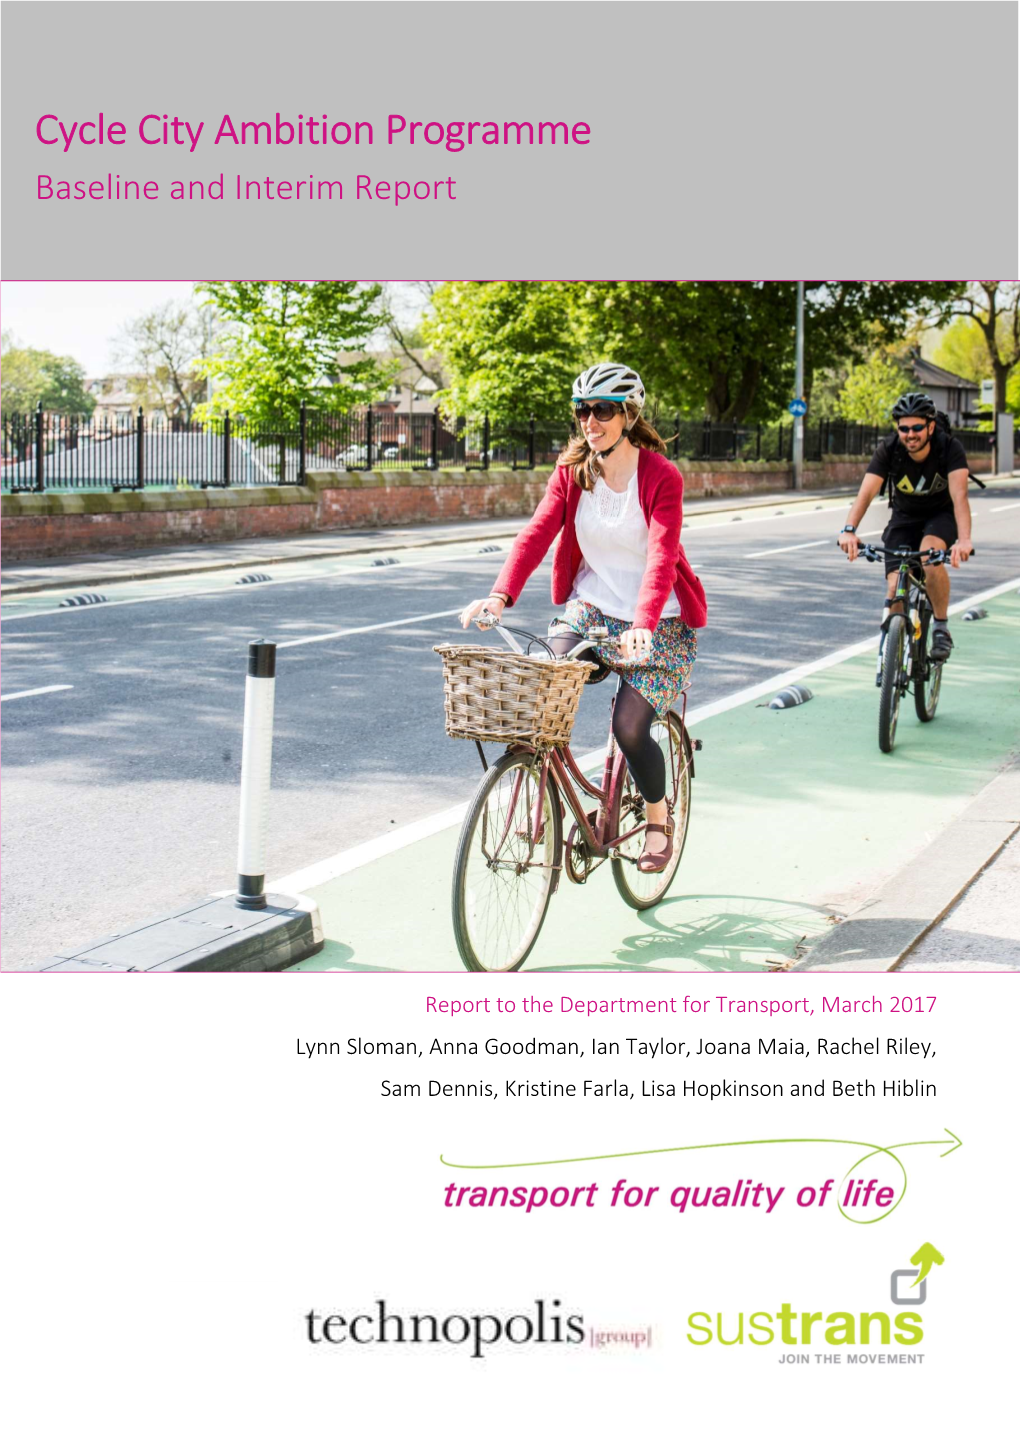 Cycle City Ambition Programme: Baseline Report